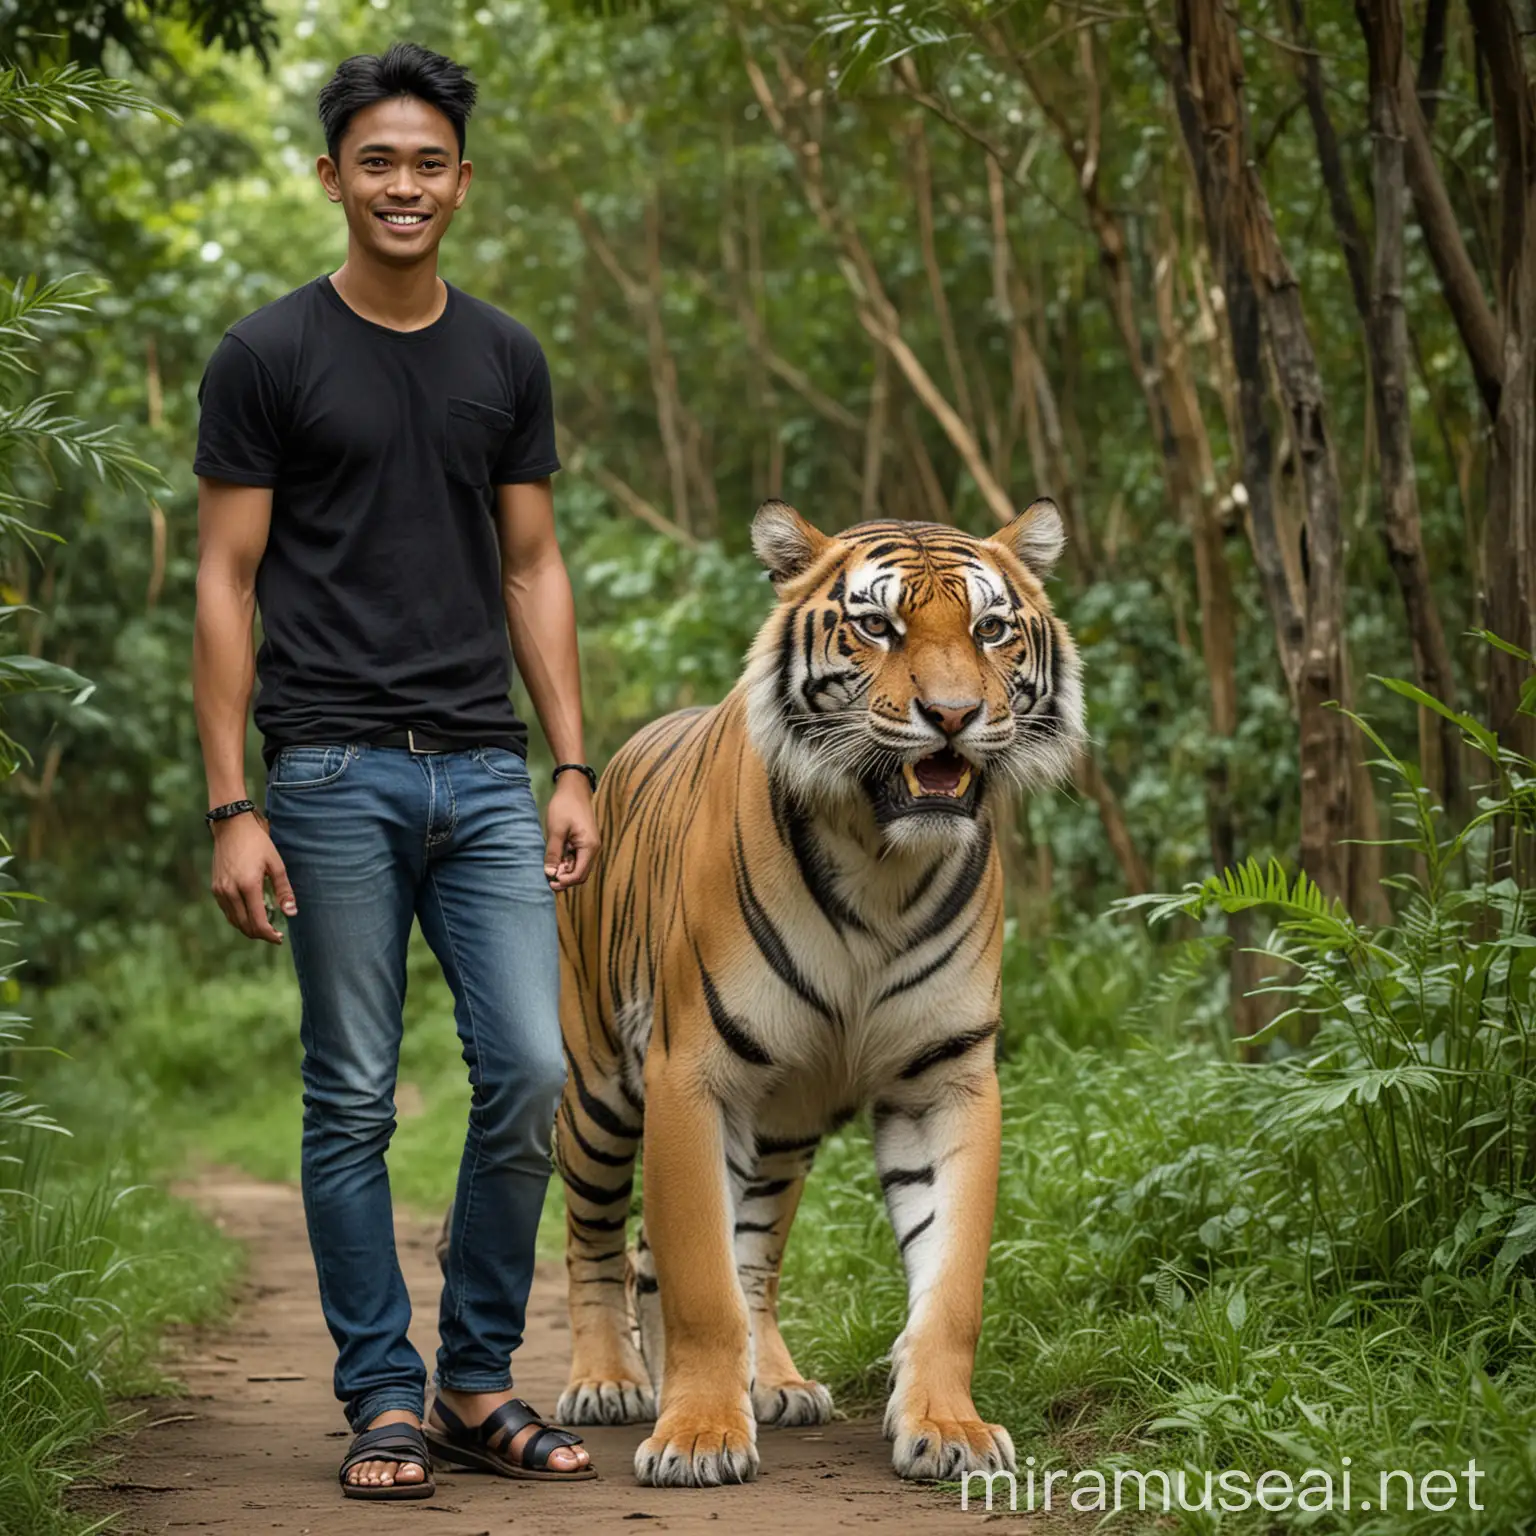 Friendly Indonesian Man Smiling with Tiger in Lush Forest